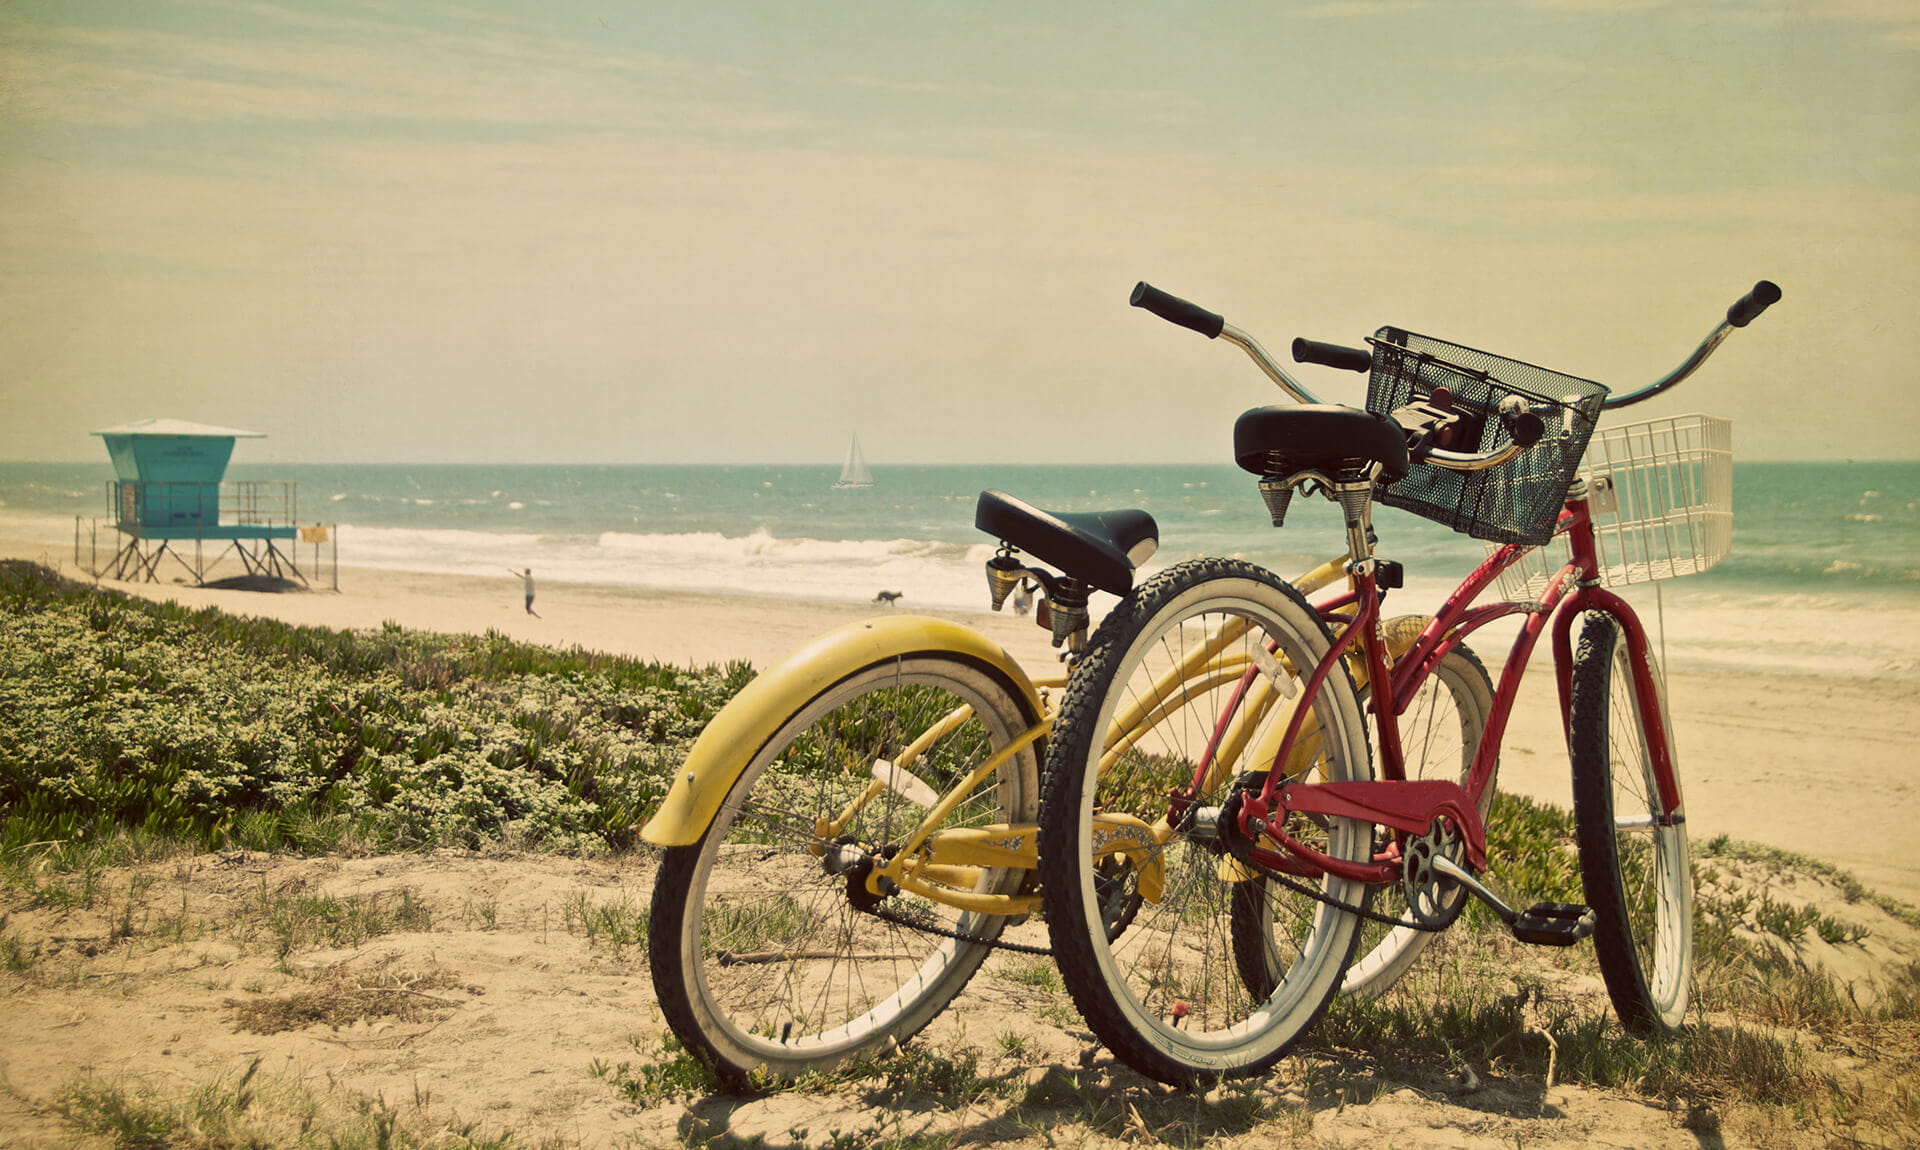 Yellow and red bikes on sand.